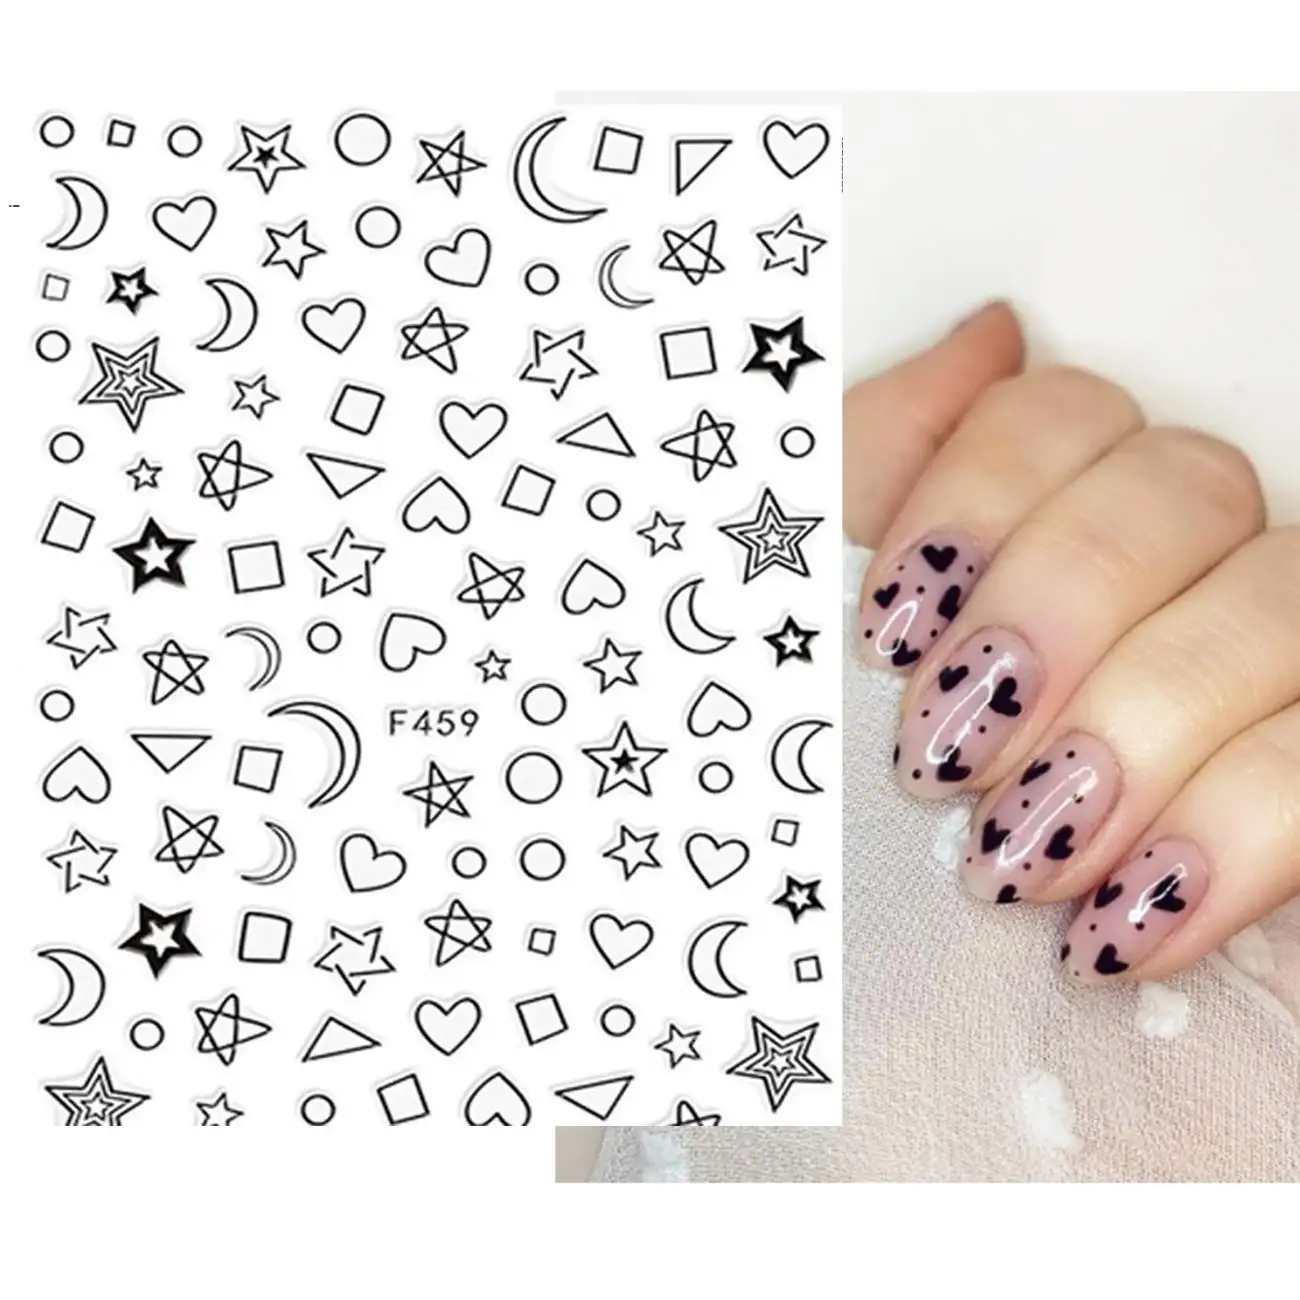 Stars and Moons Sky Designs Nail Art Stickers & Nail Decals 3D Metallic Gold and Black Color